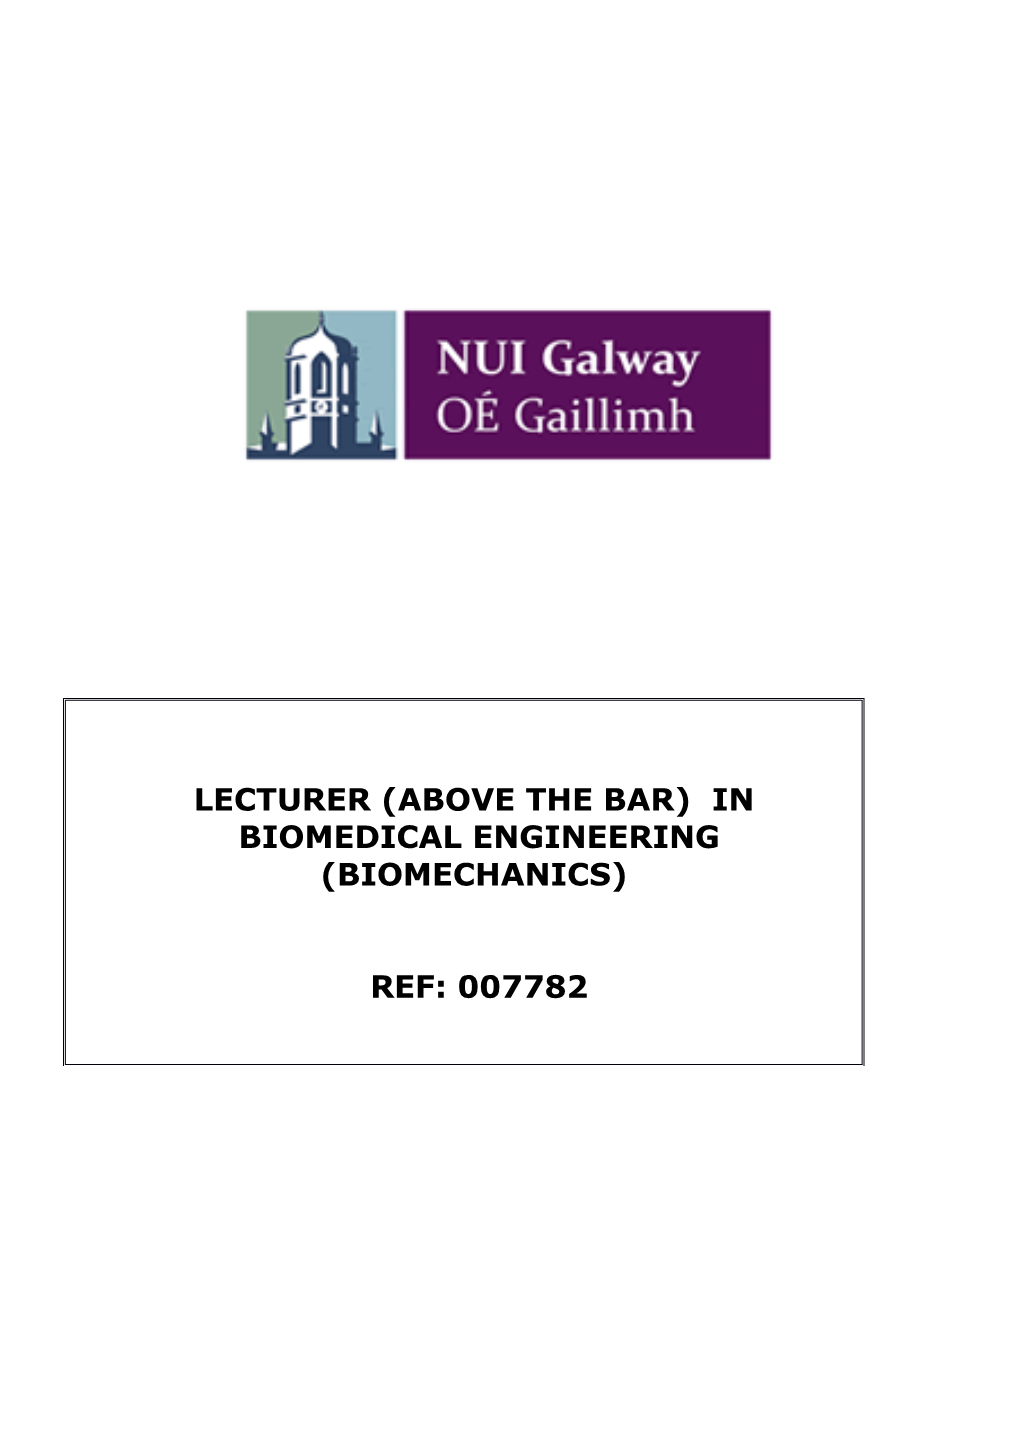 Competency Framework for Lecturer Roles at NUIG8